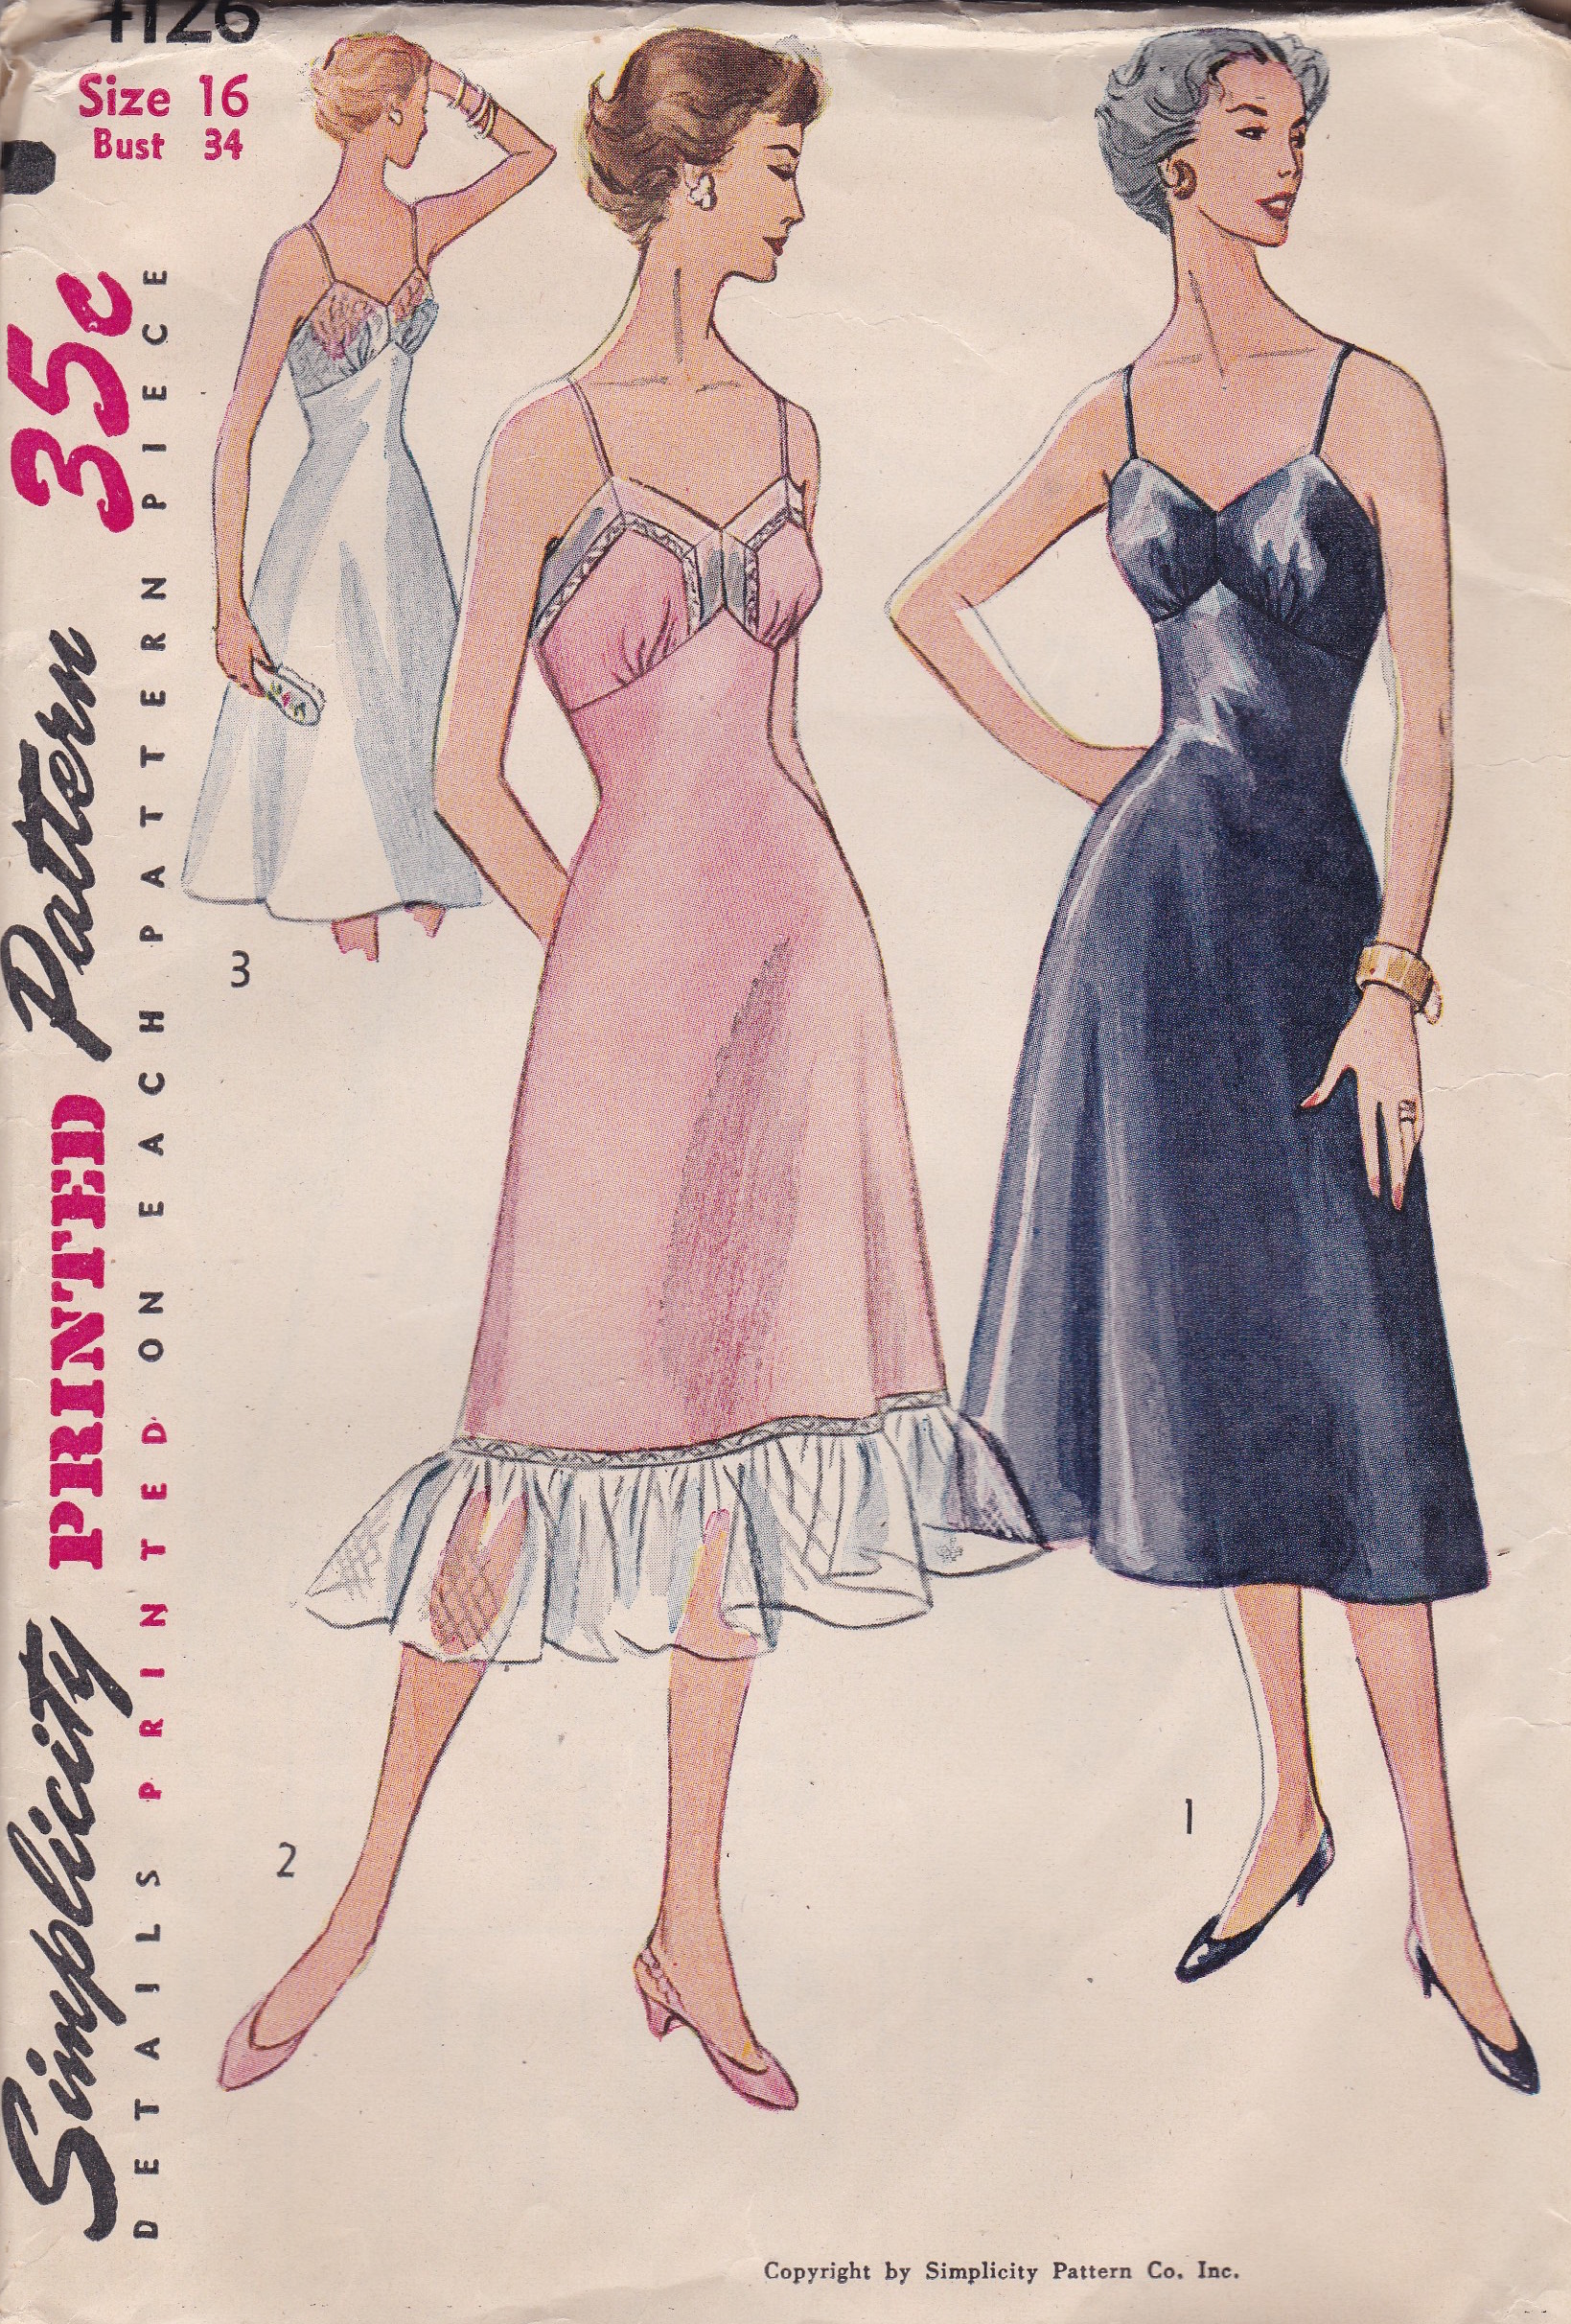 Simplicity S612, Vintage Sewing Patterns